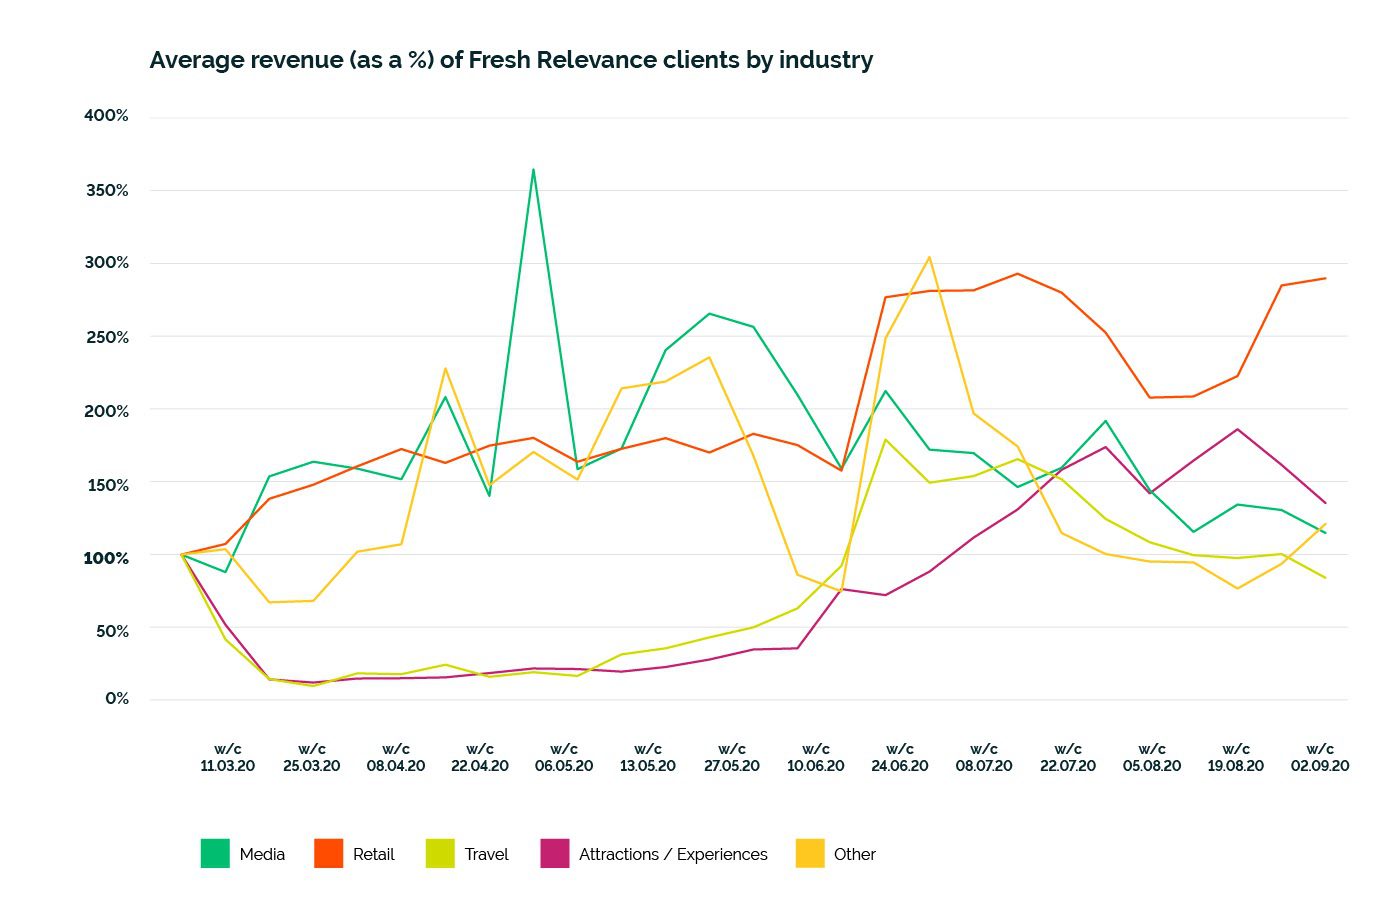 Average revenue of Fresh Relevance clients by industry